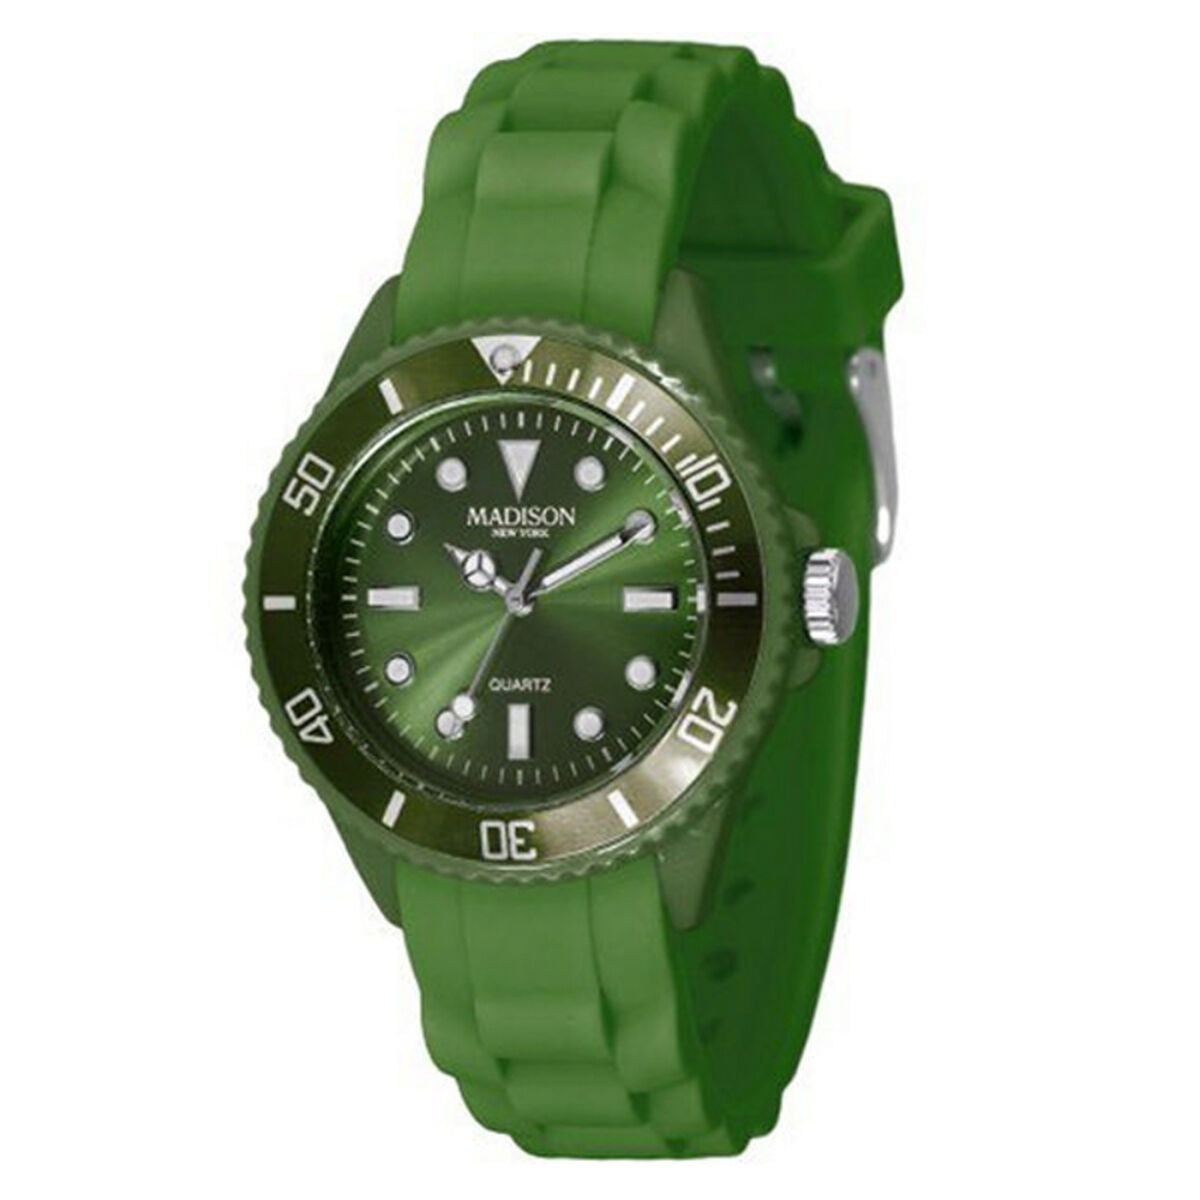 Ladies'Watch Madison L4167-18 (Ø 34 mm), Madison, Watches, Women, ladieswatch-madison-l4167-18-o-34-mm, : Quartz Movement, :Green, Brand_Madison, category-reference-2570, category-reference-2635, category-reference-2995, category-reference-t-19667, category-reference-t-19725, Condition_NEW, fashion, gifts for women, original gifts, Price_20 - 50, RiotNook